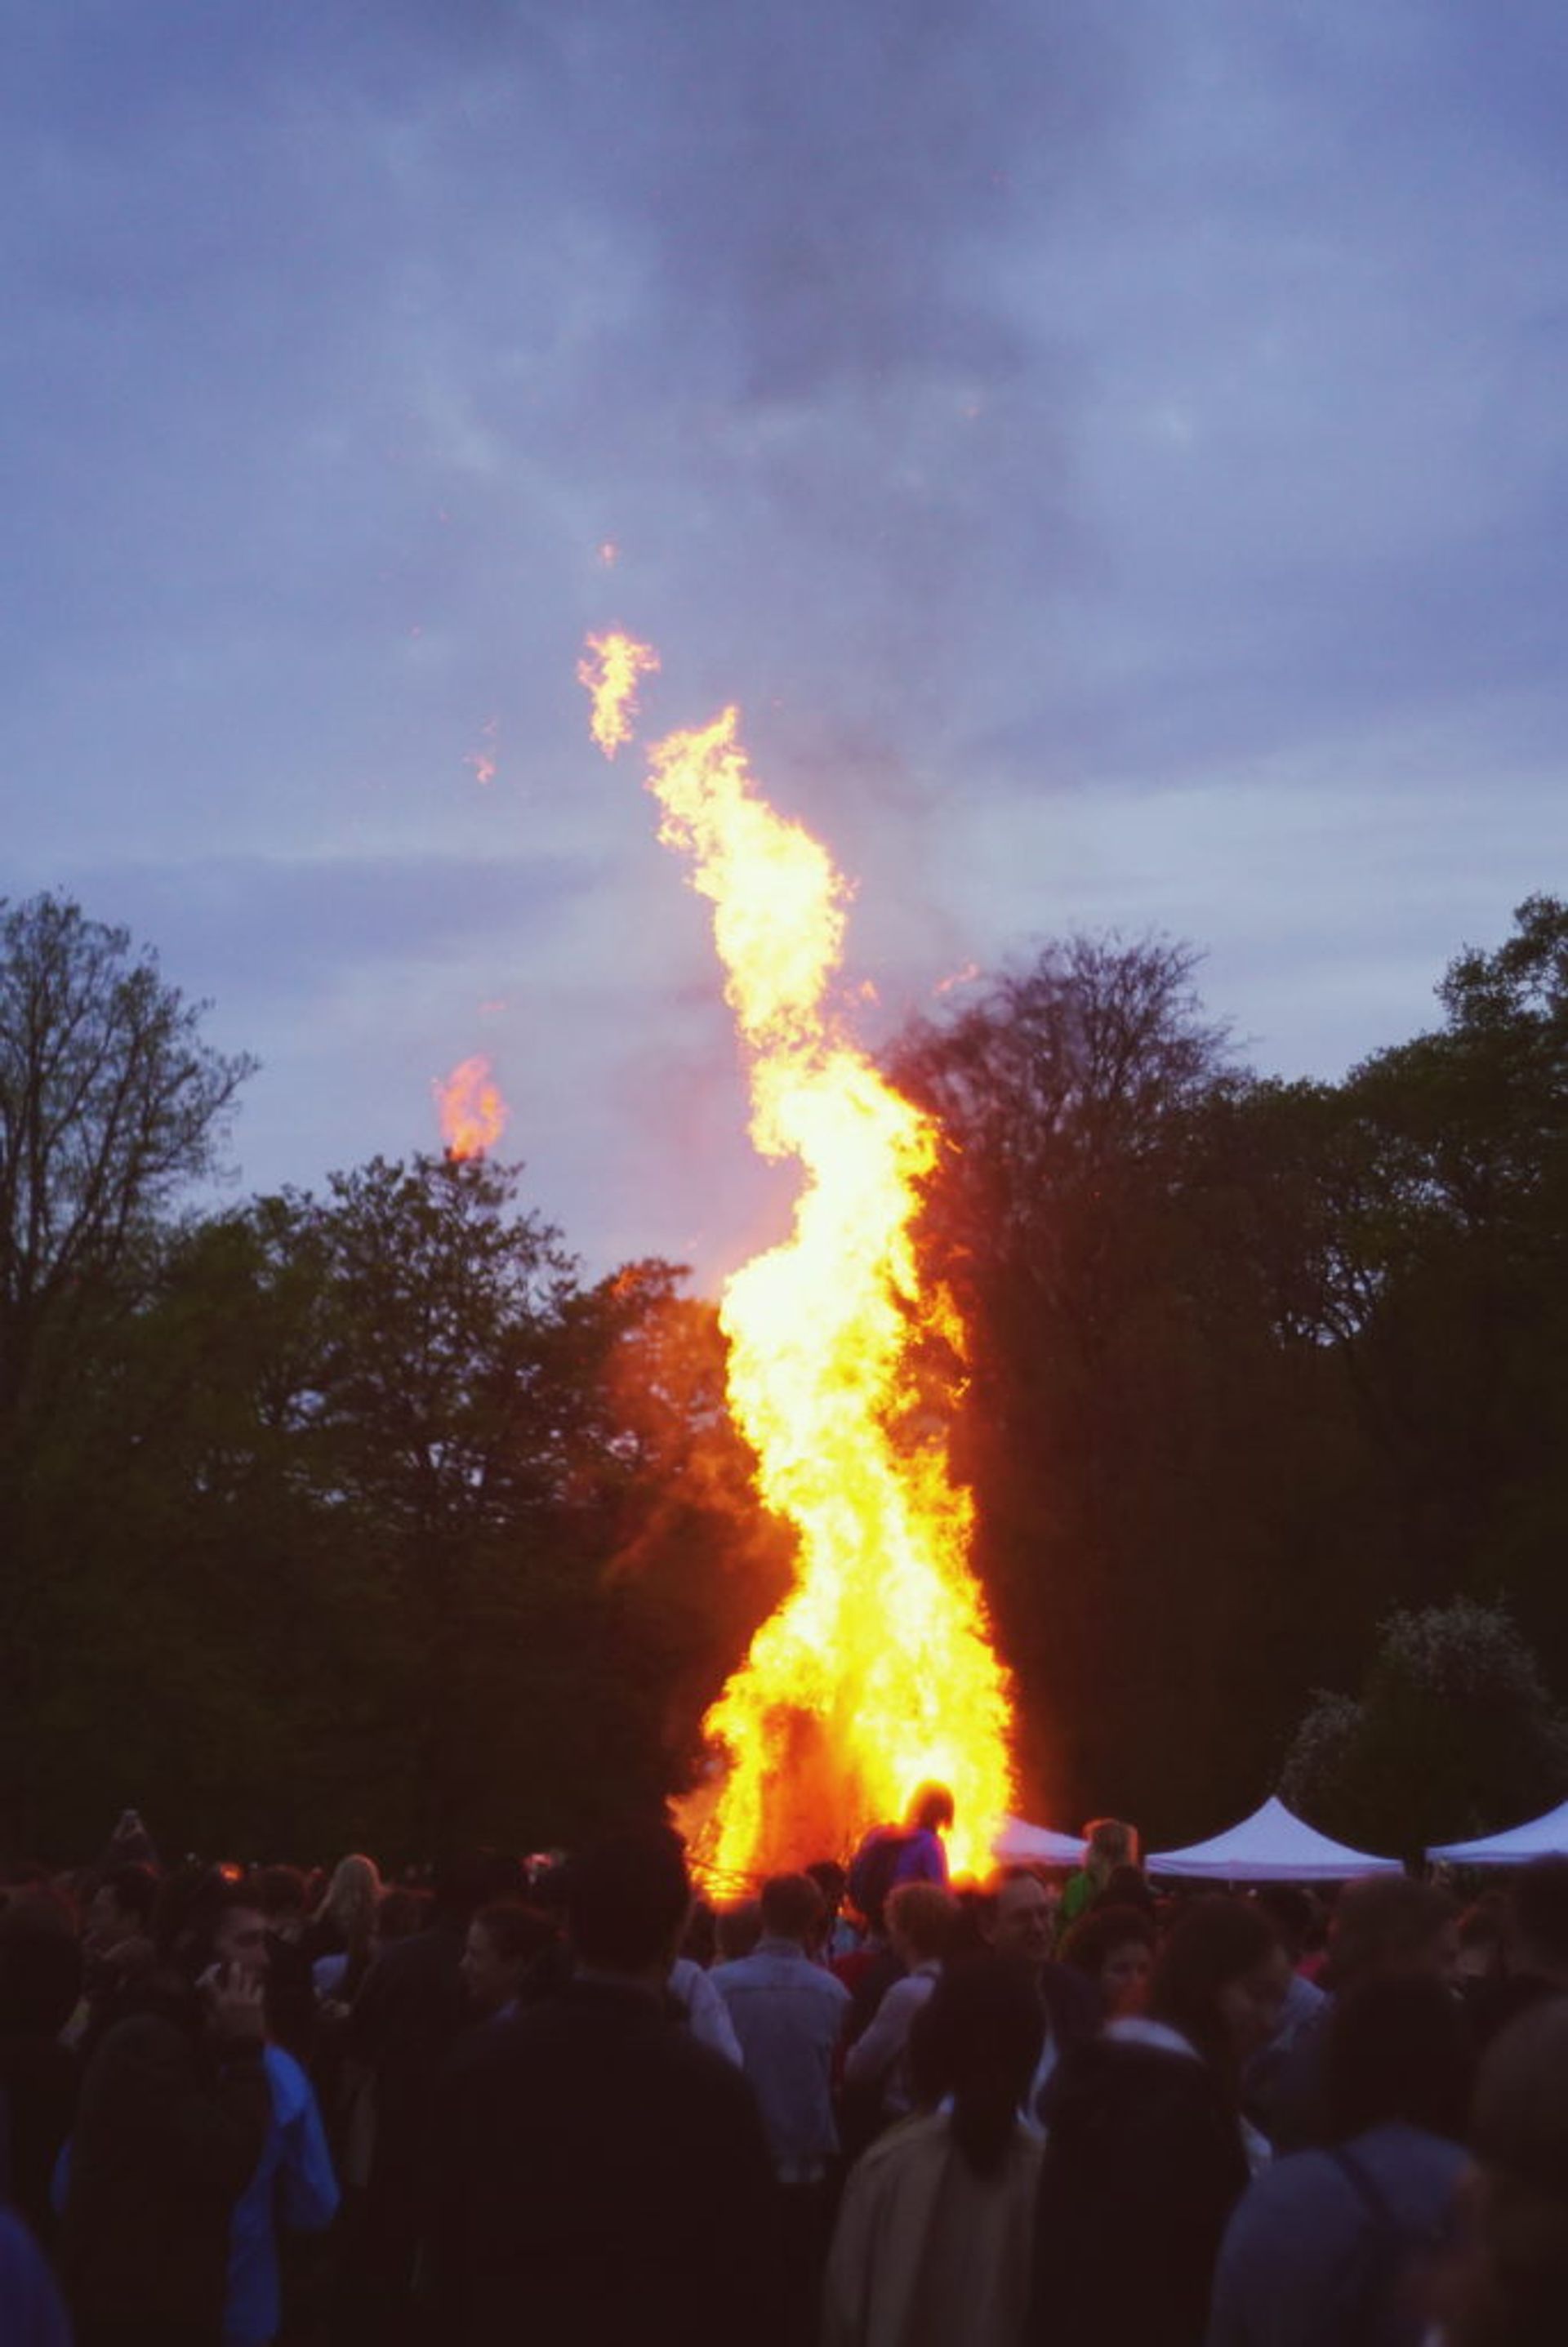 A large crowd of people standing around a bonfire.